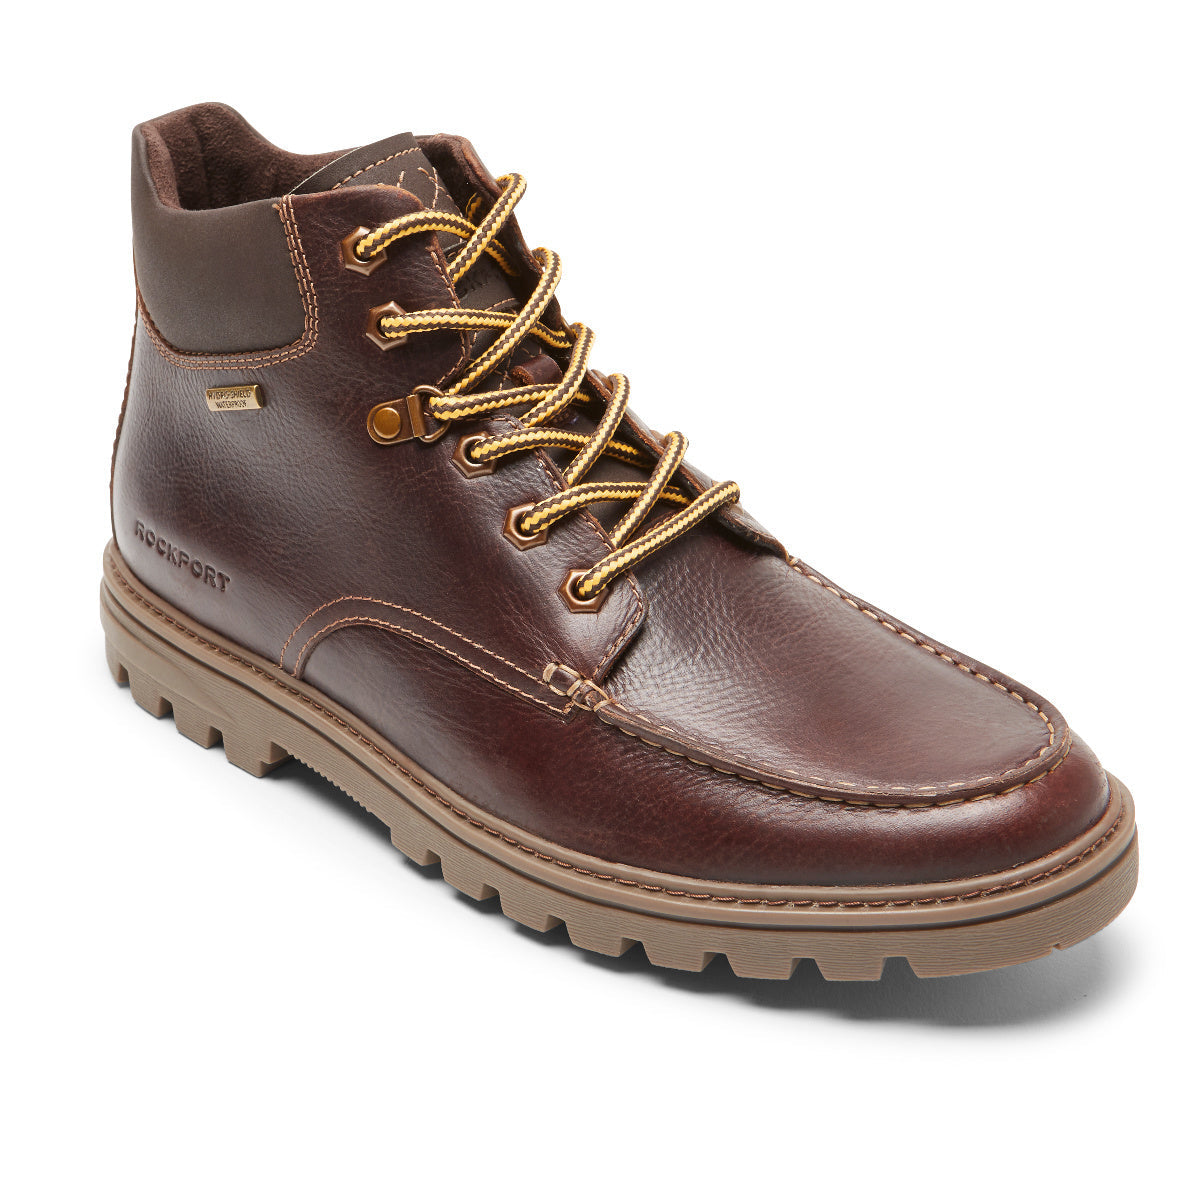 Rockport Mens Weather or Not Waterproof Moc Toe Boot